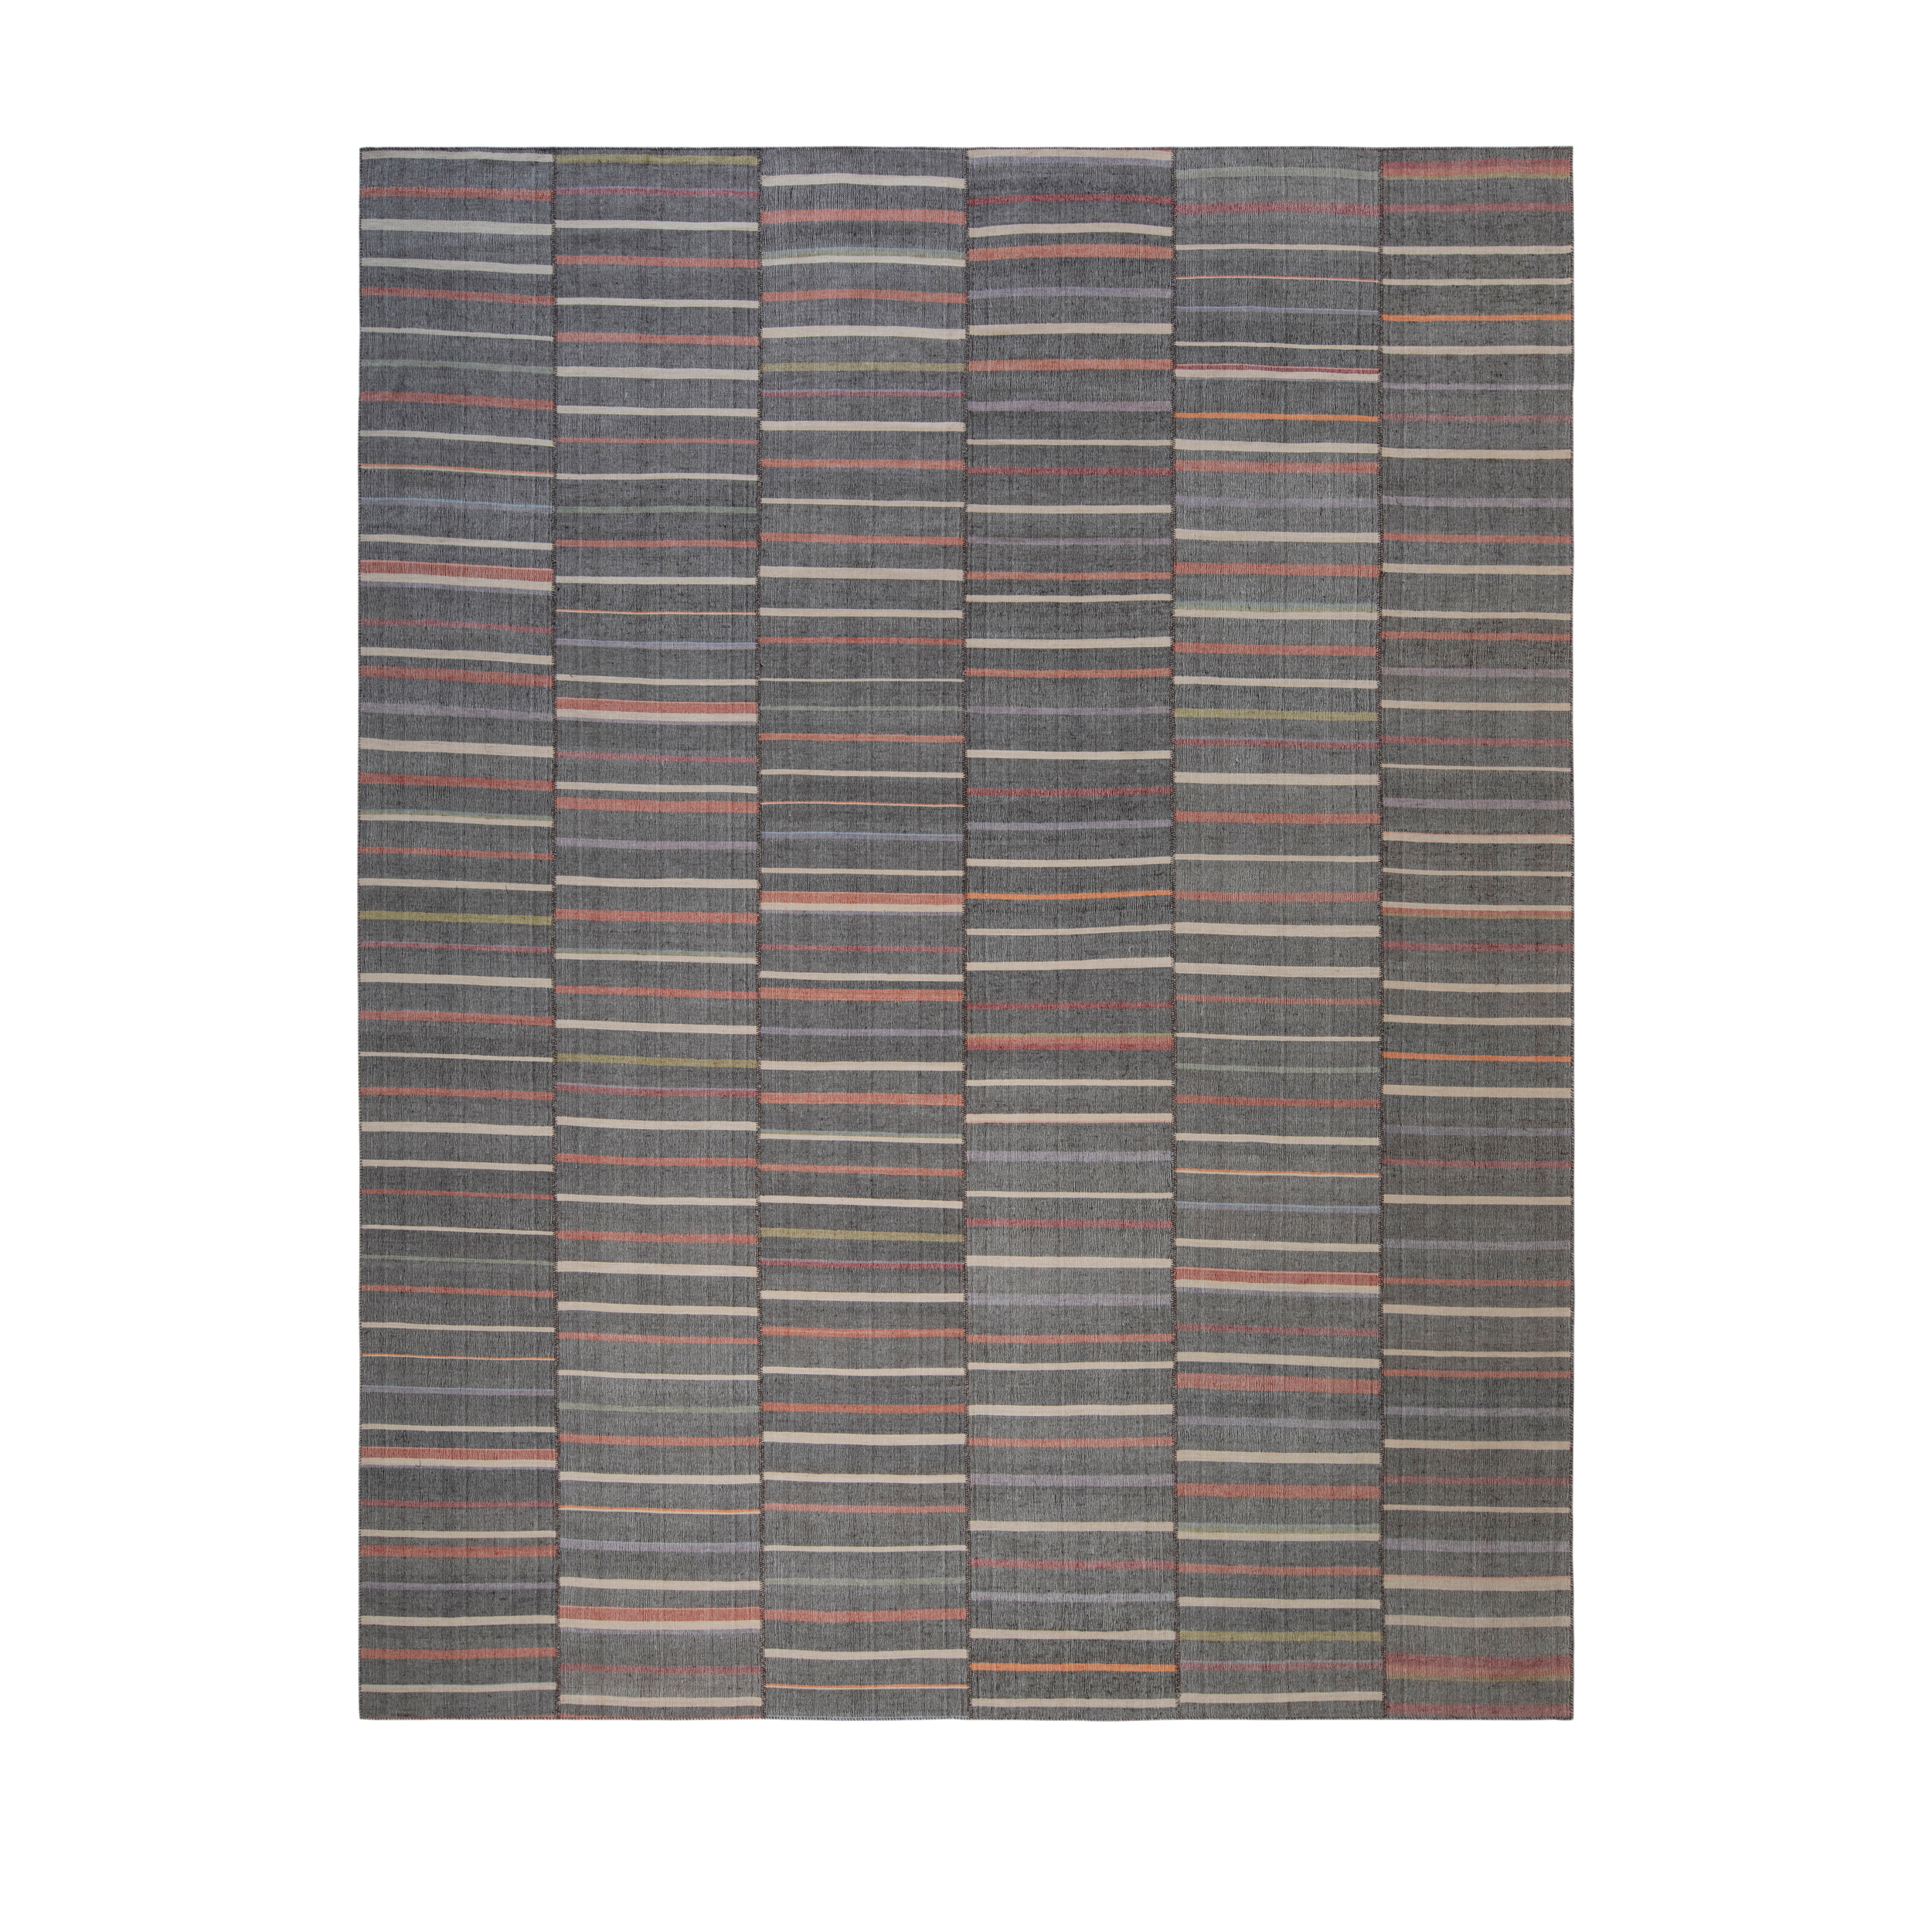 This Santiago rug is a stunning flatweave made with handspun wool and cotton.  